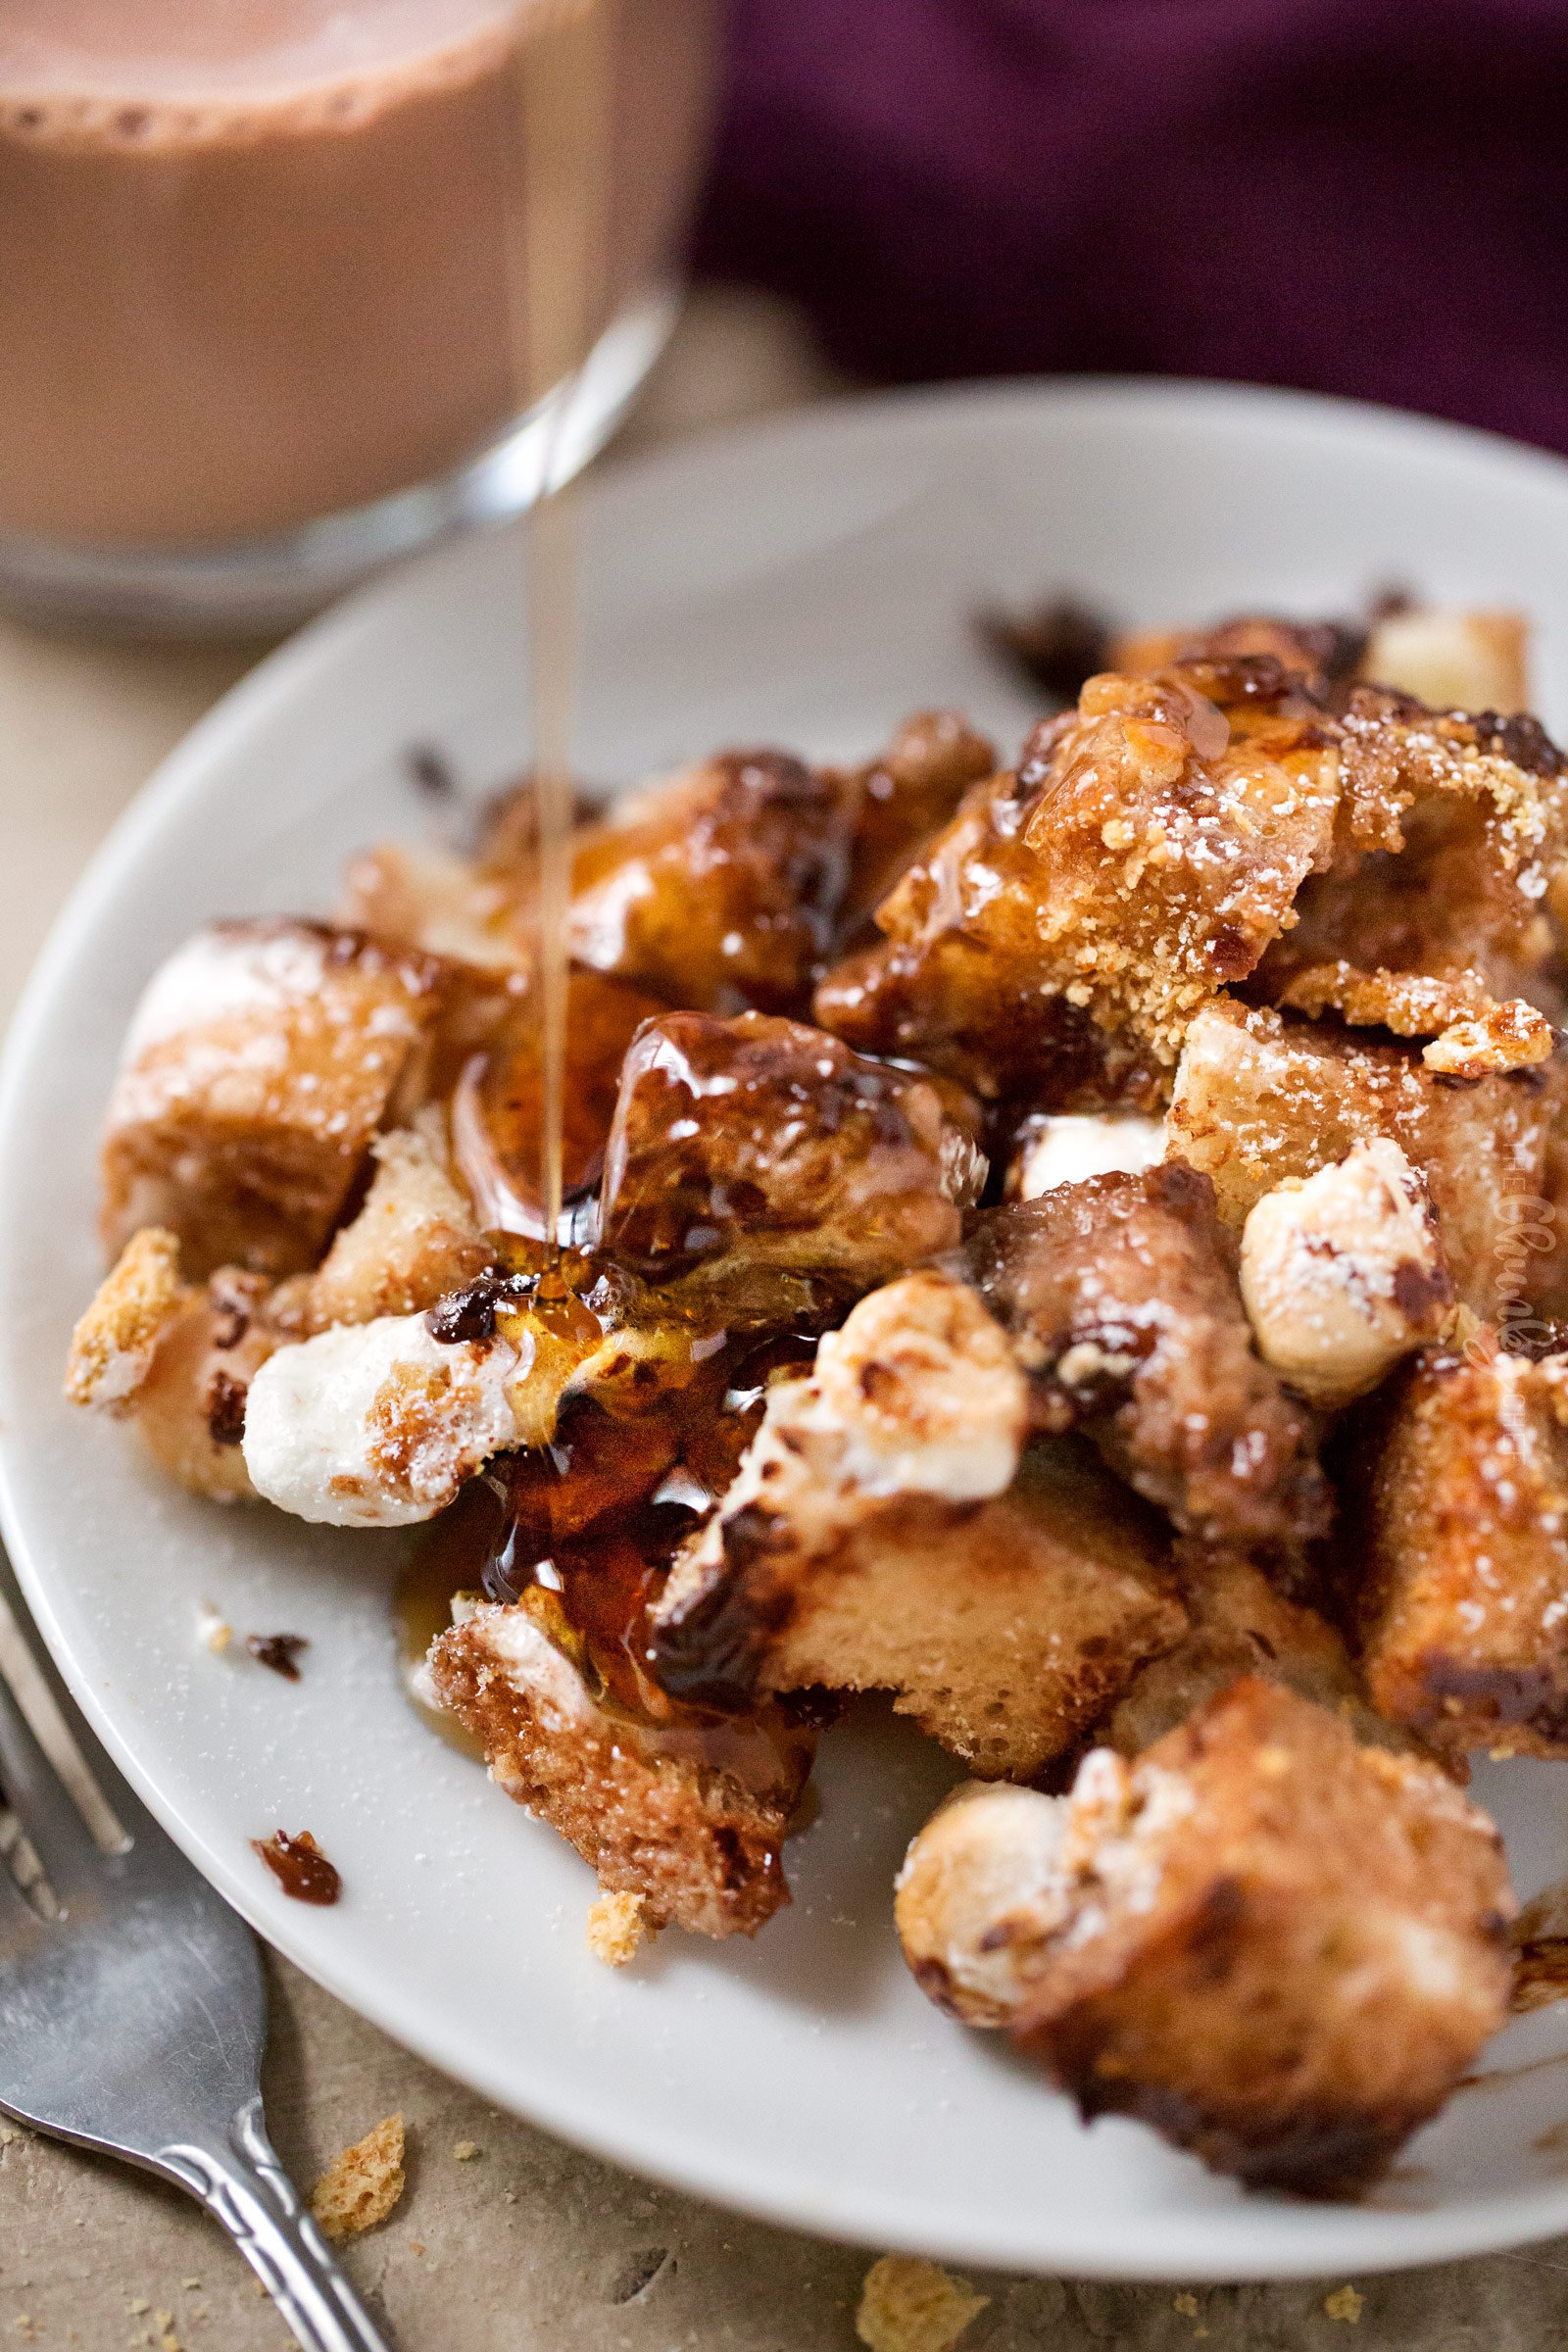 Serving of French toast bake on plate with a drizzle of maple syrup